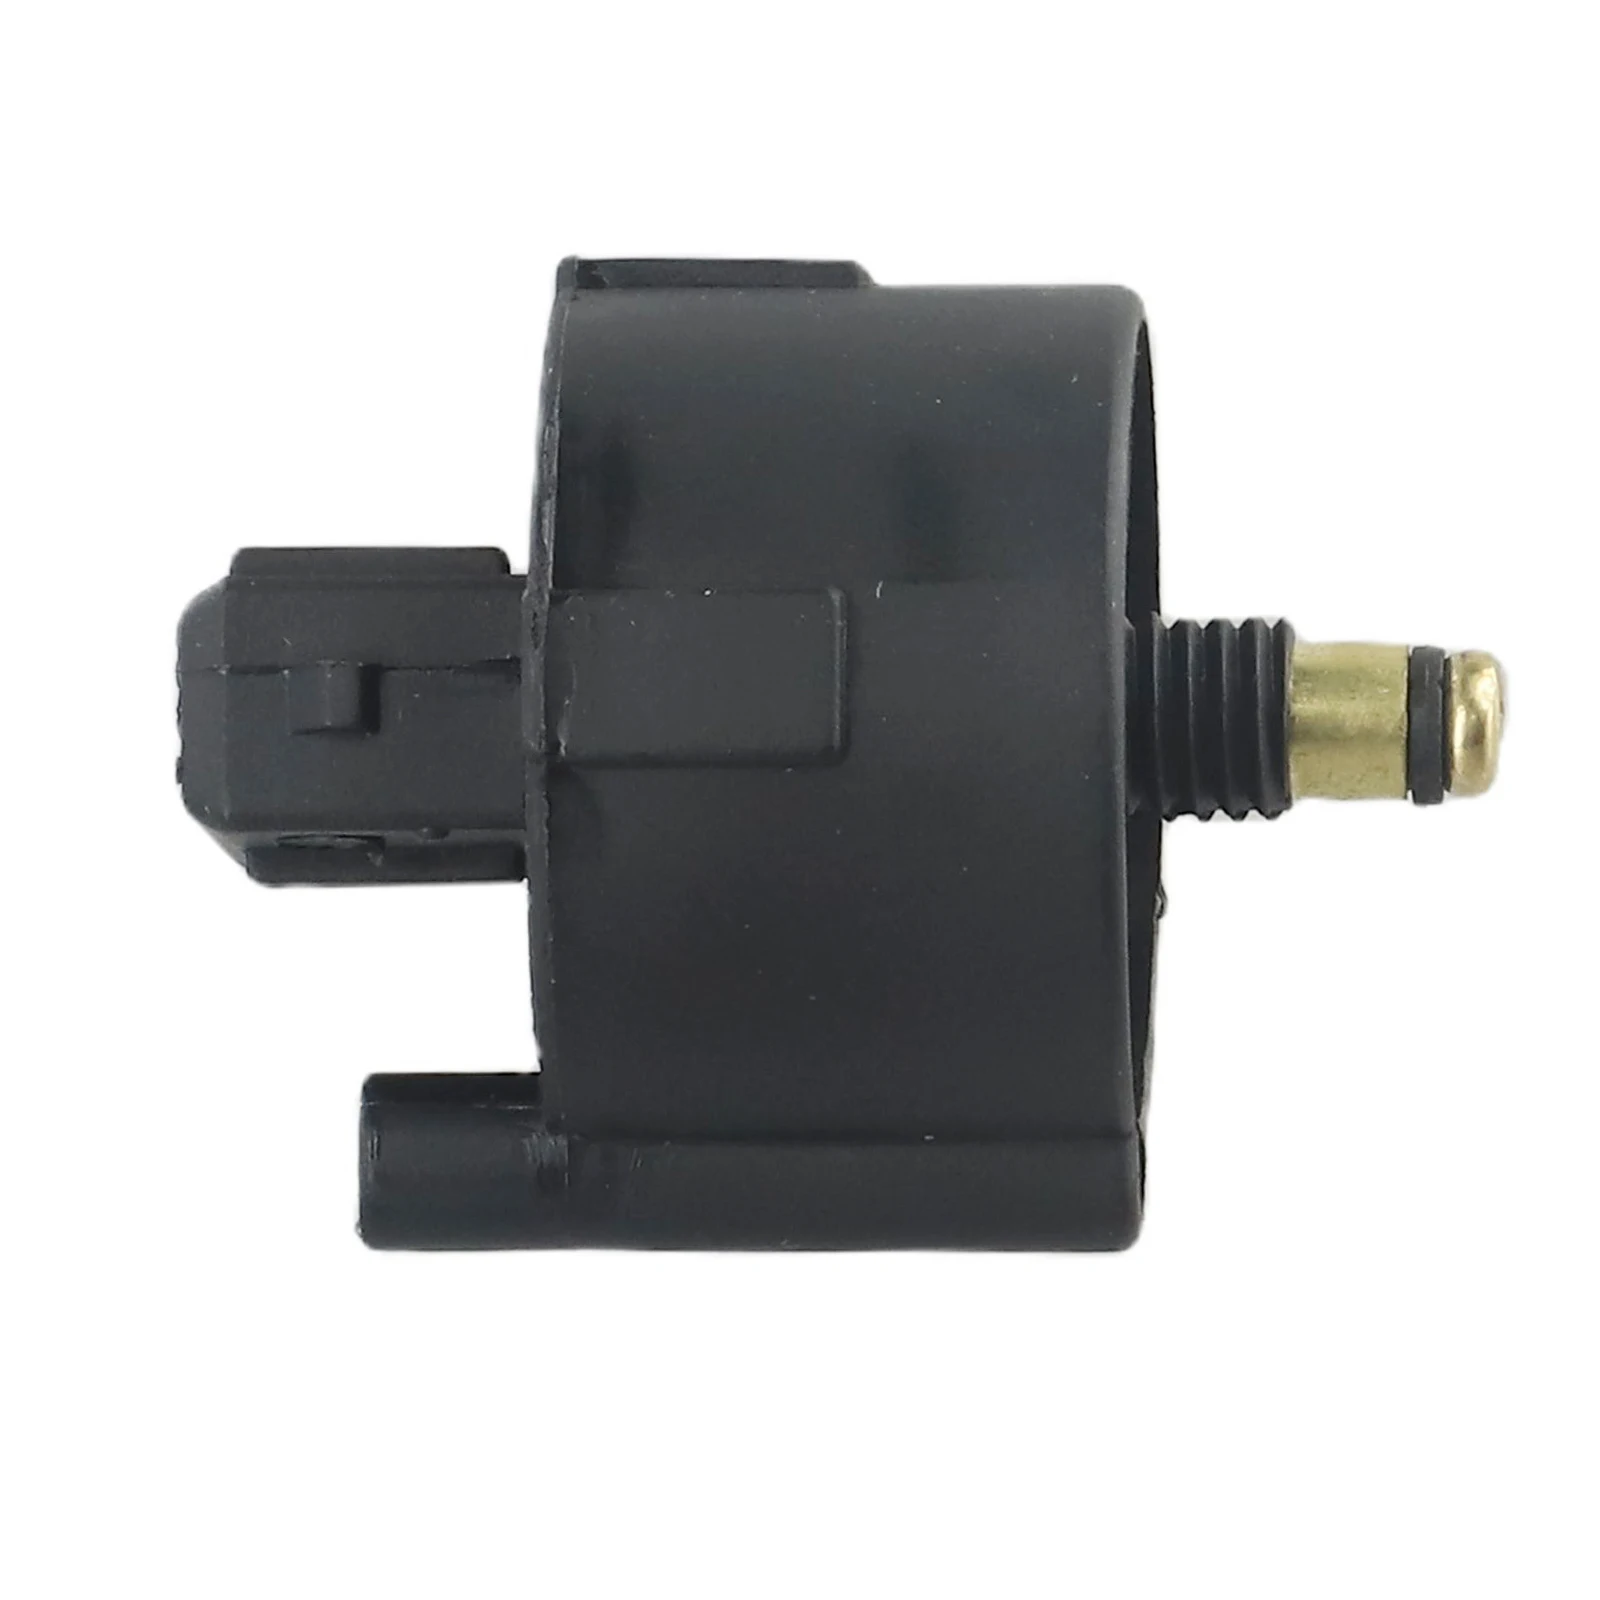 

Fuel Filter Water Sensor Black For Ssangyong Rodius Kyron Parts Plastic 1PCS For Ssangyong Actyon Rexton Hot Sales